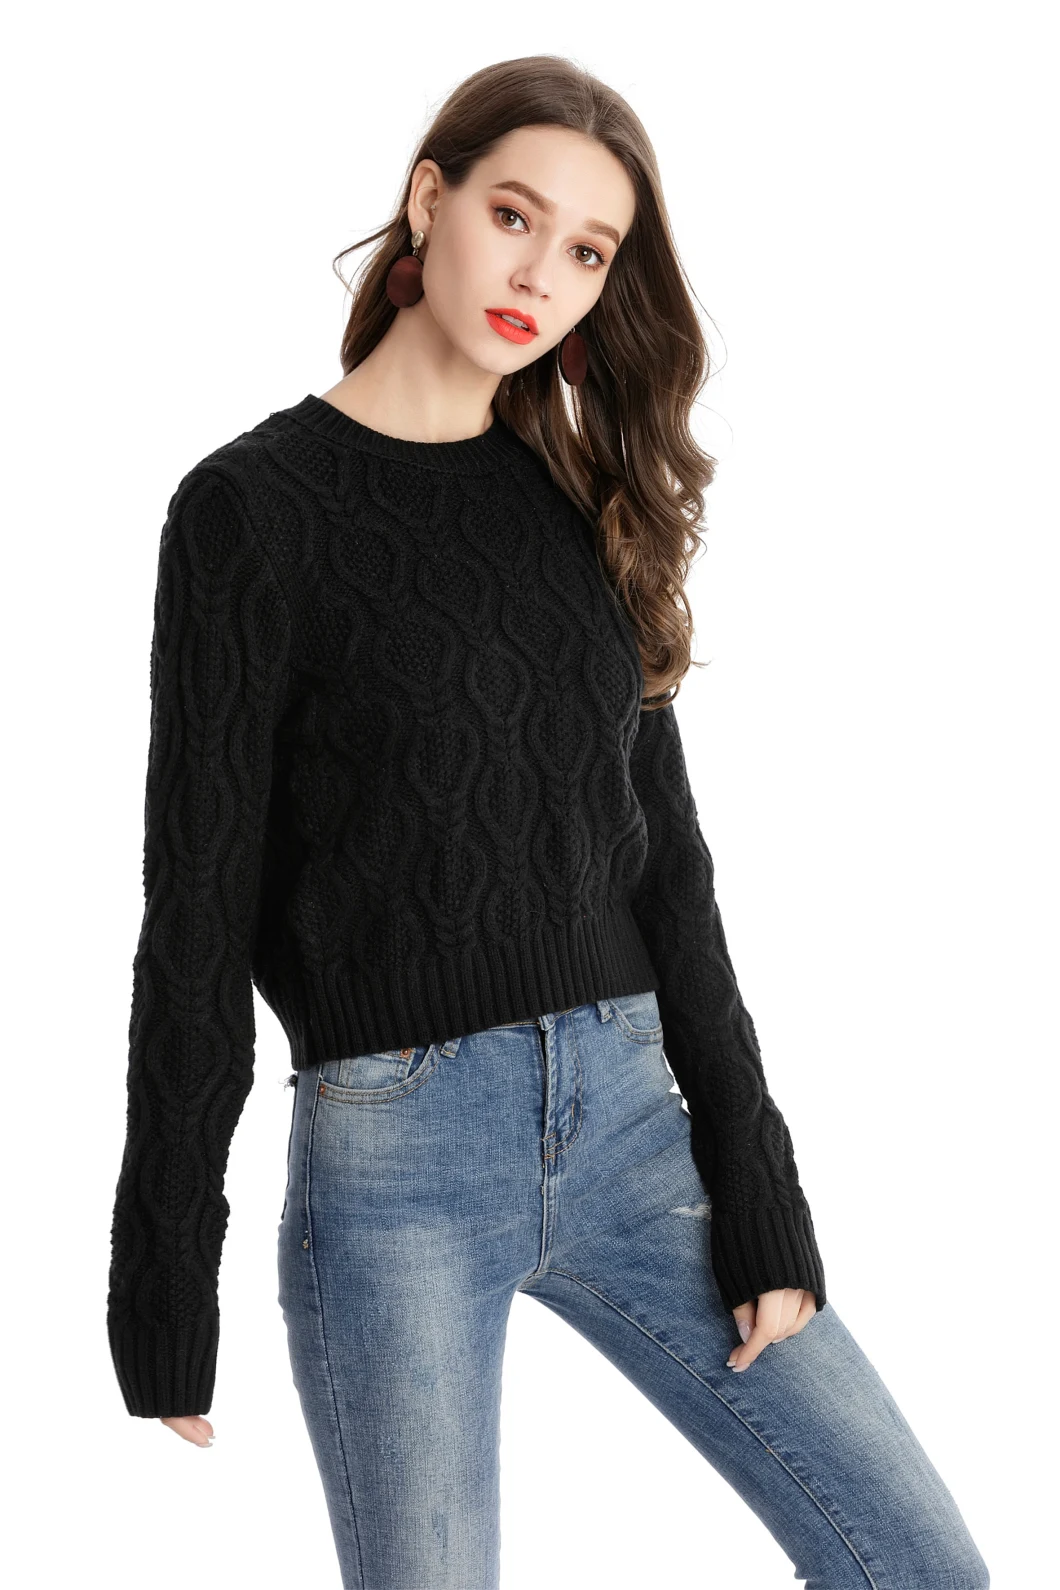 Women Pullover Ladies Knitwear Solid Color Apparel Round Neck Sweater